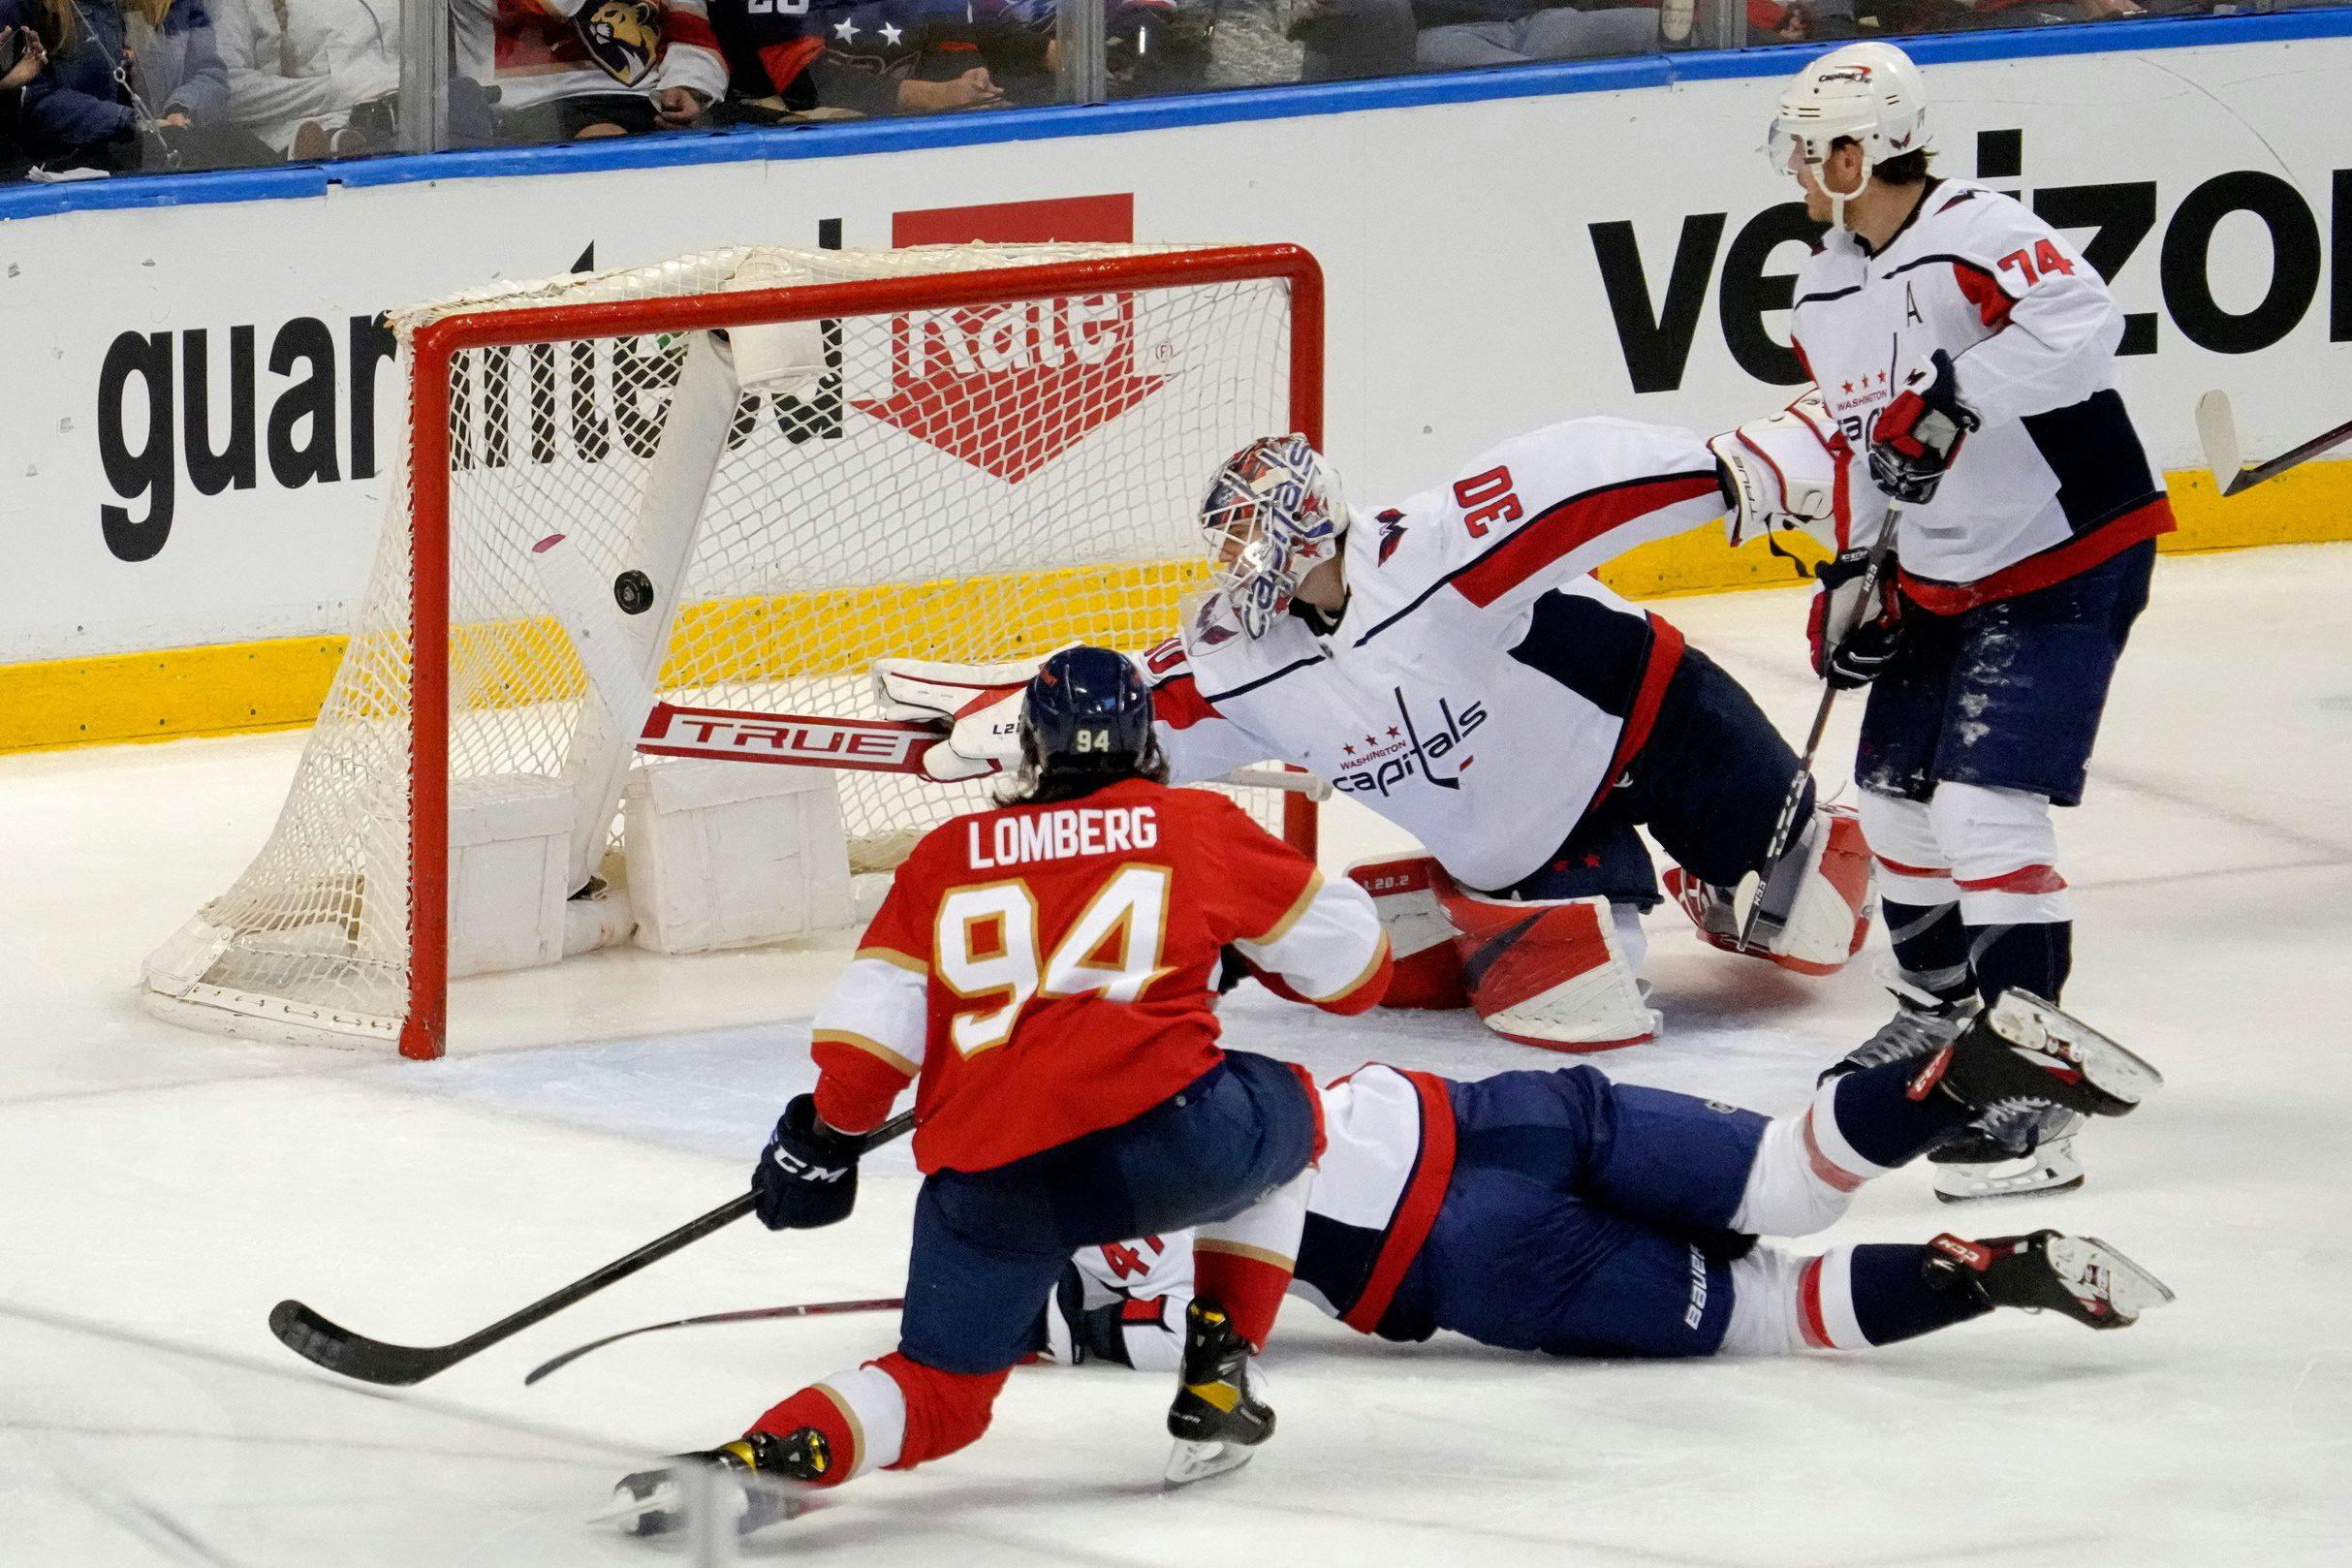 Today is the last day the Washington Capitals are reigning Stanley